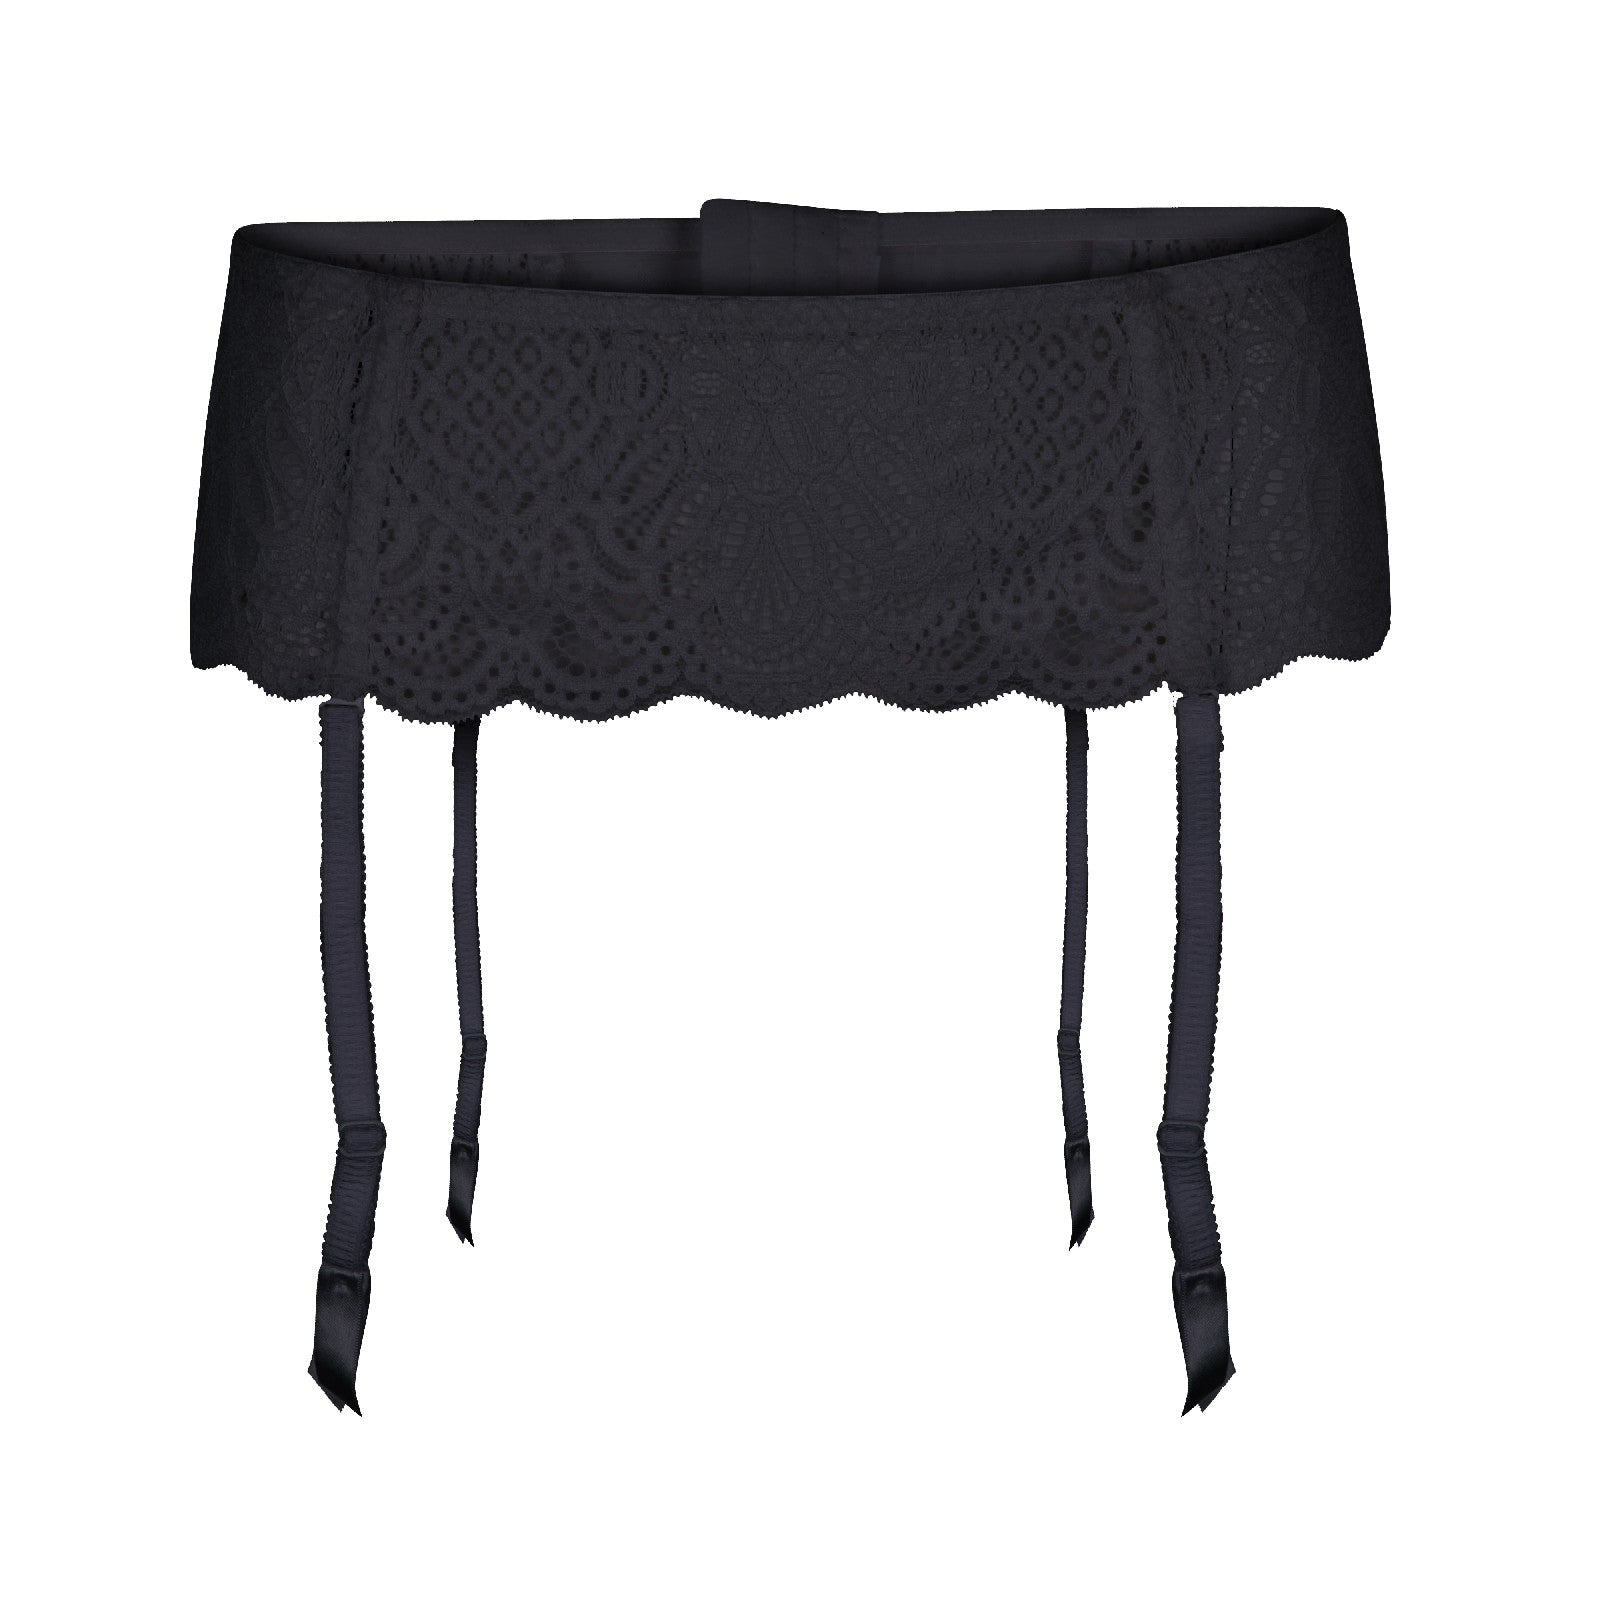 Daily Lace Suspender Belt